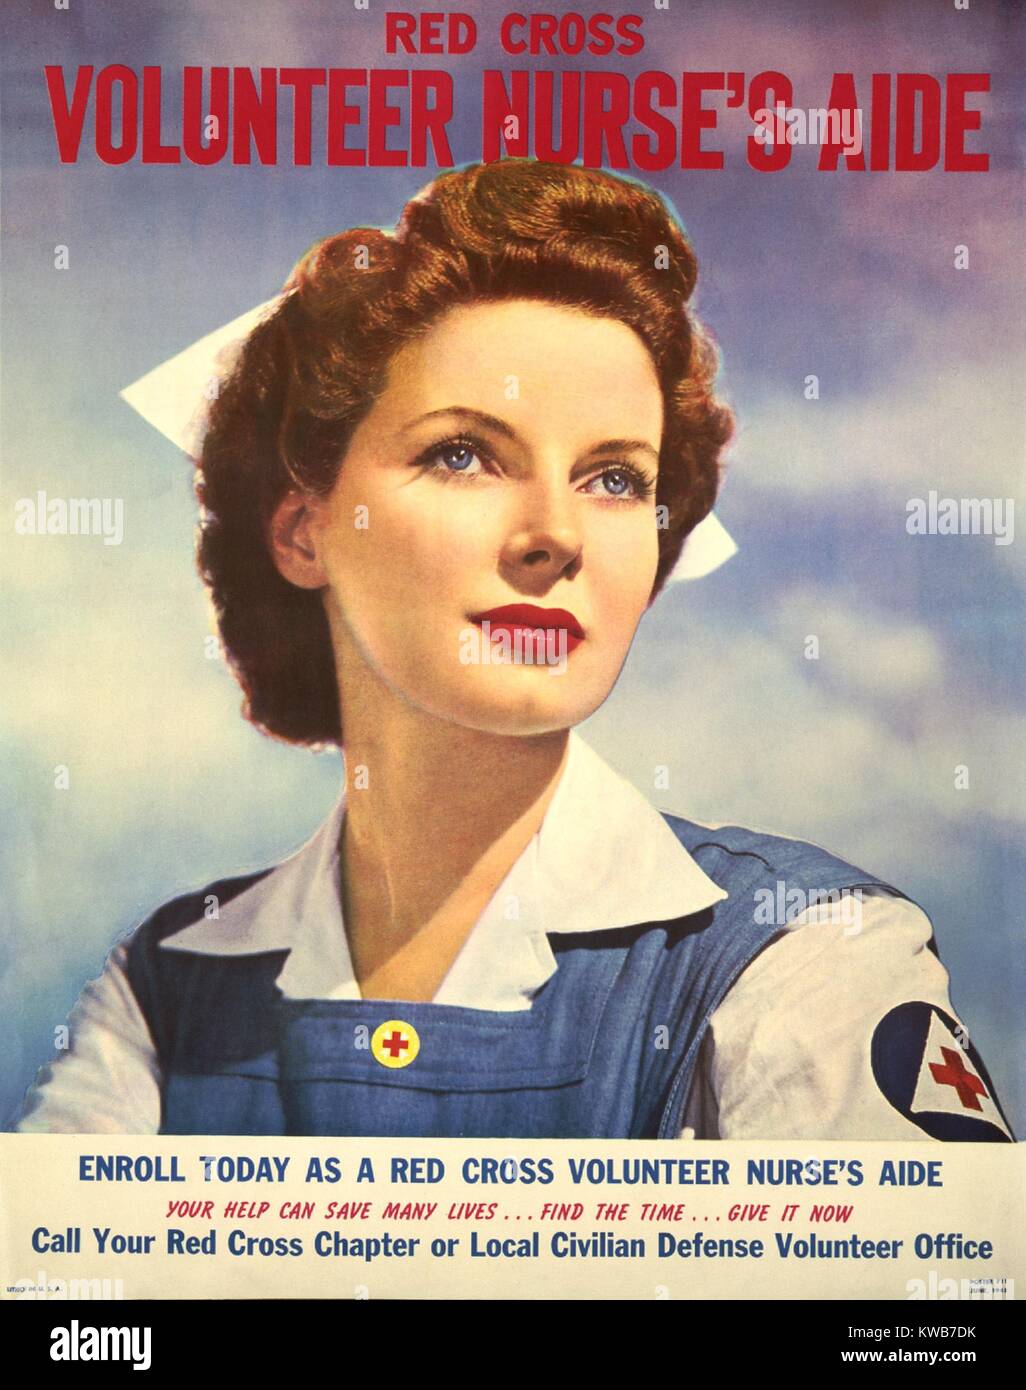 U.S. recruitment poster for Red Cross volunteer nurse's aide during World War 2. June 1943, (BSLOC 2014 10 194) Stock Photo